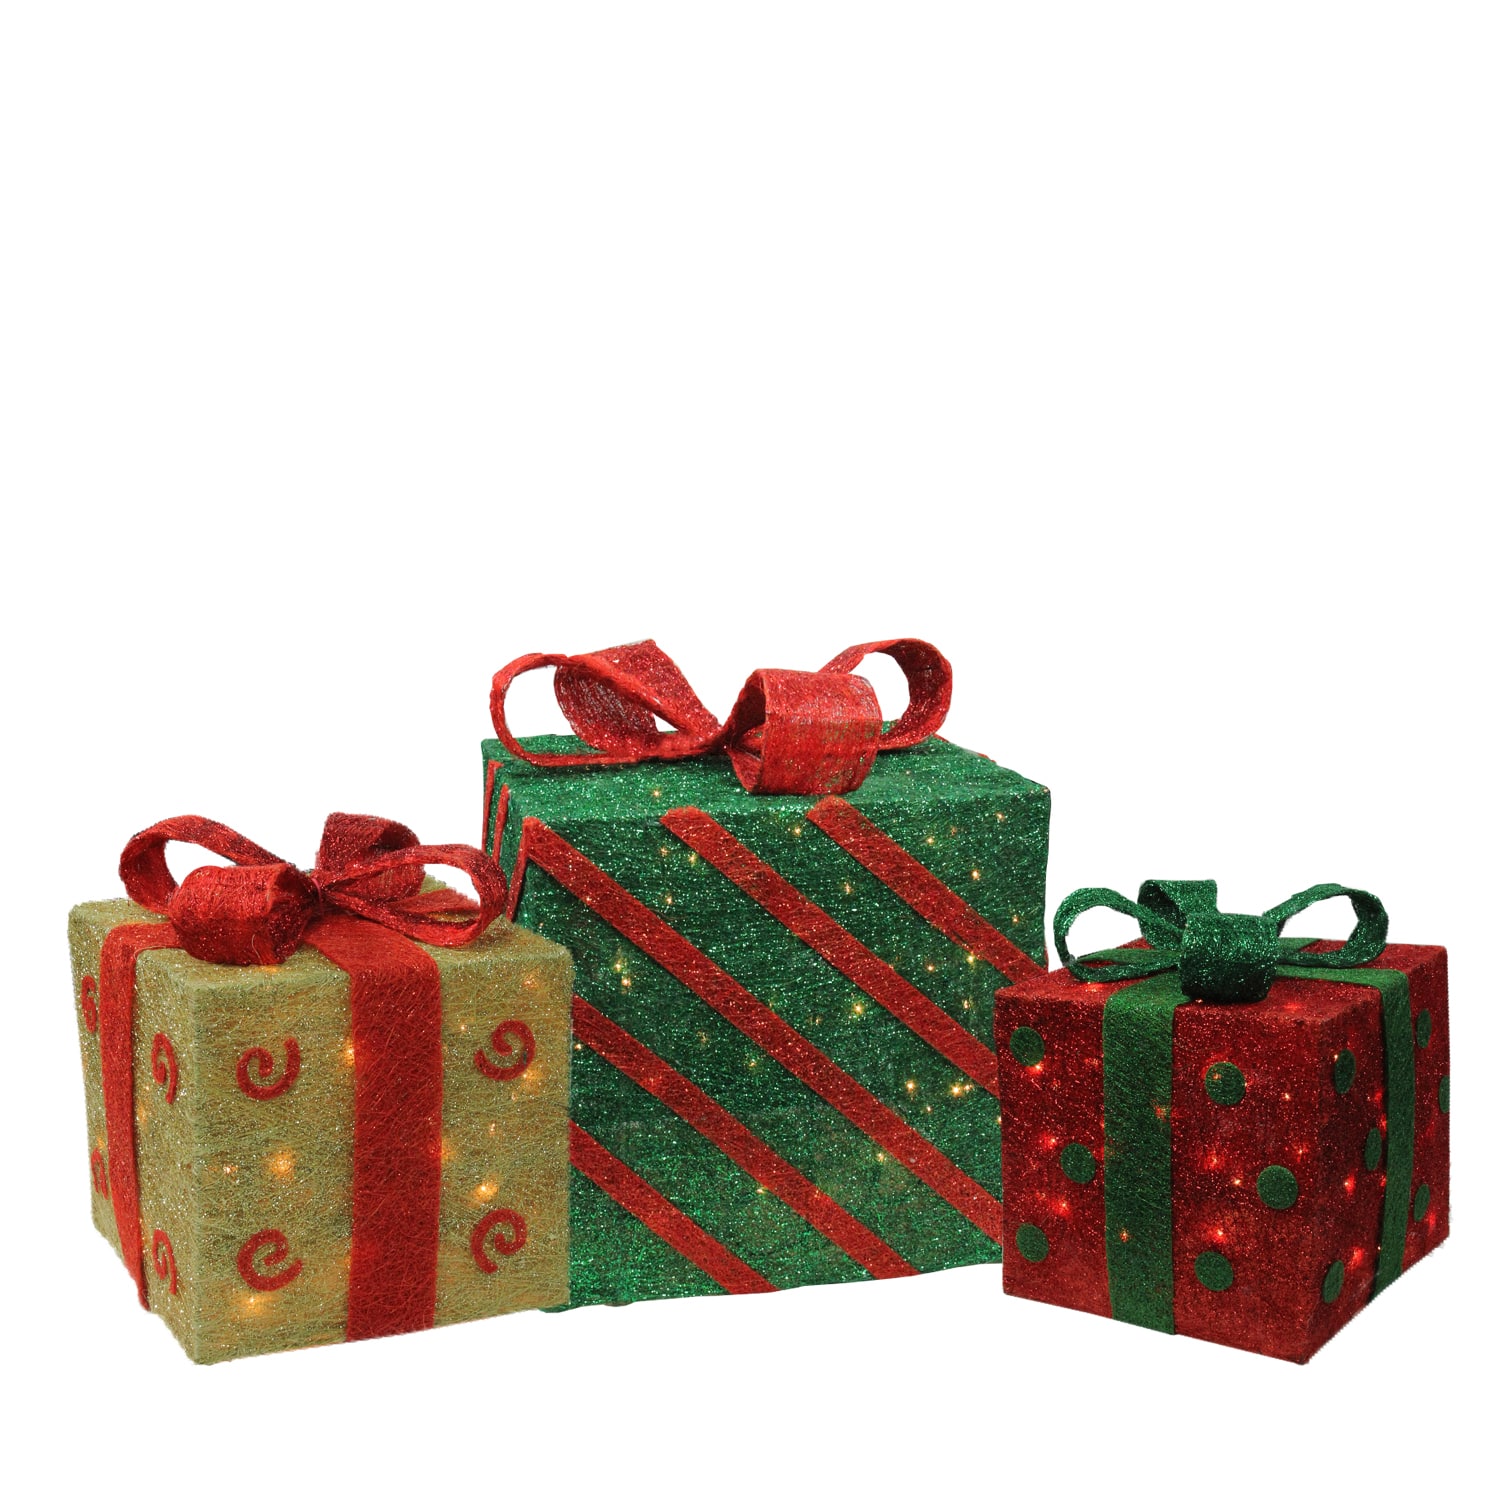 Green & Lighted Gift Boxes Outdoor Christmas Décor Set | Michaels